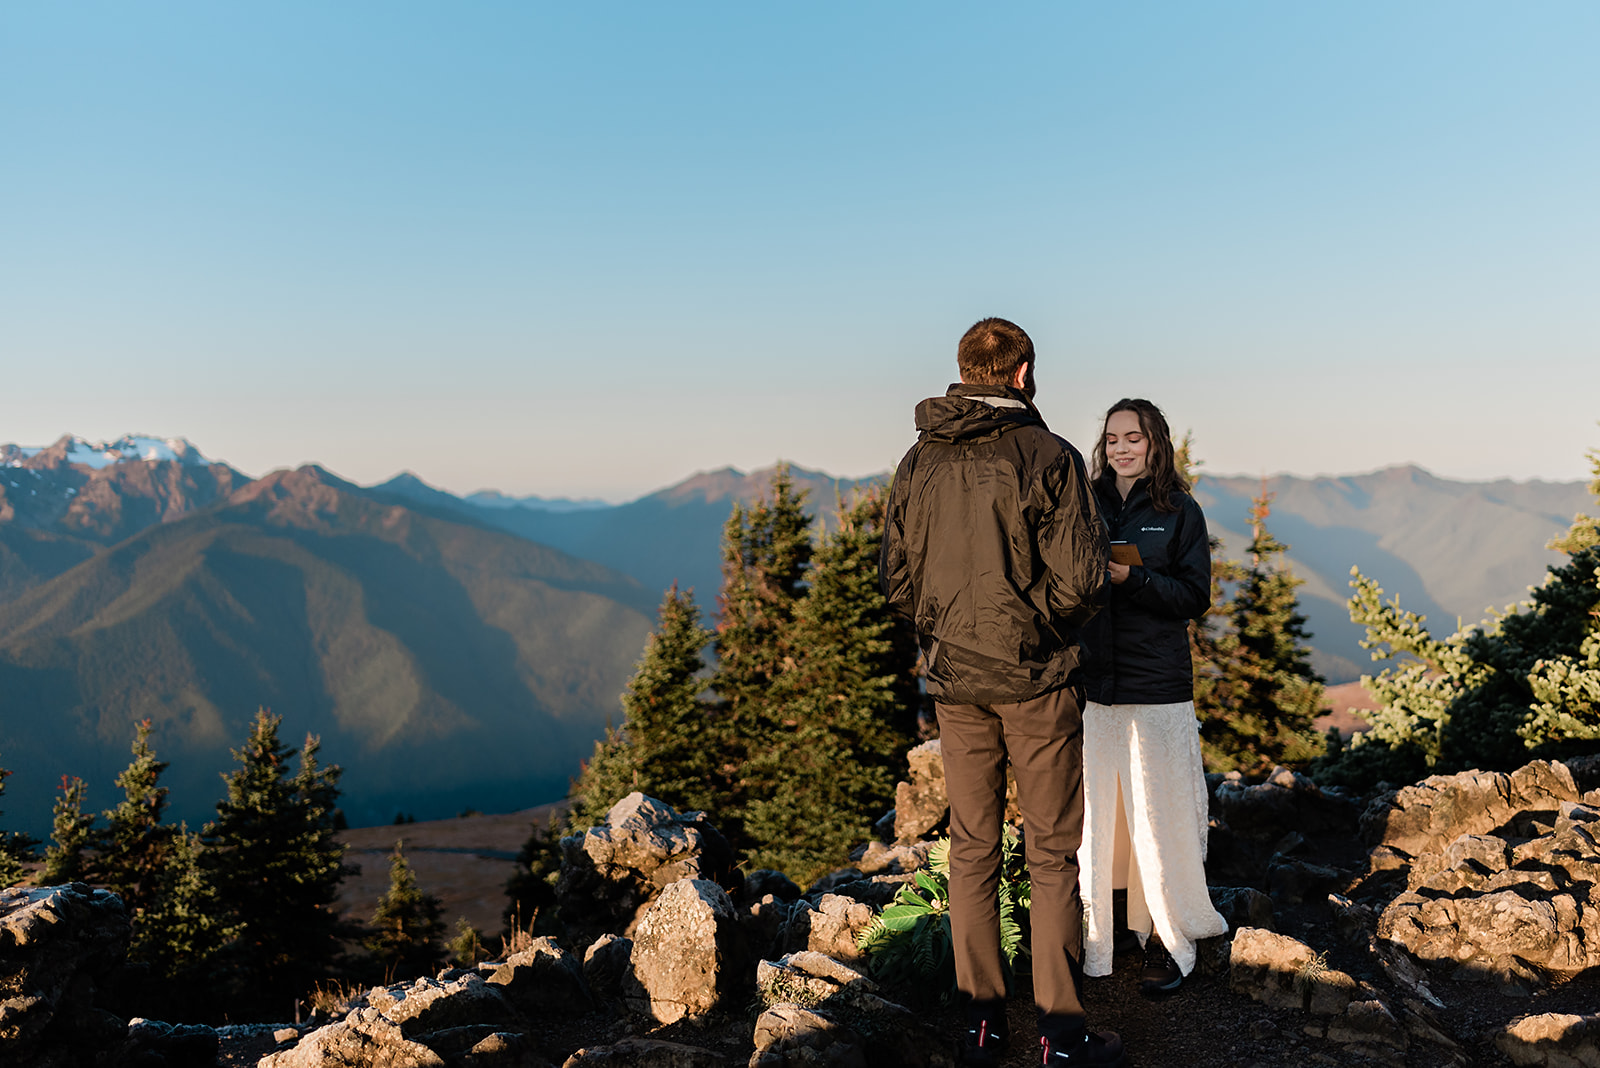 This is a picture of an adventure elopement happening on a mountainside.